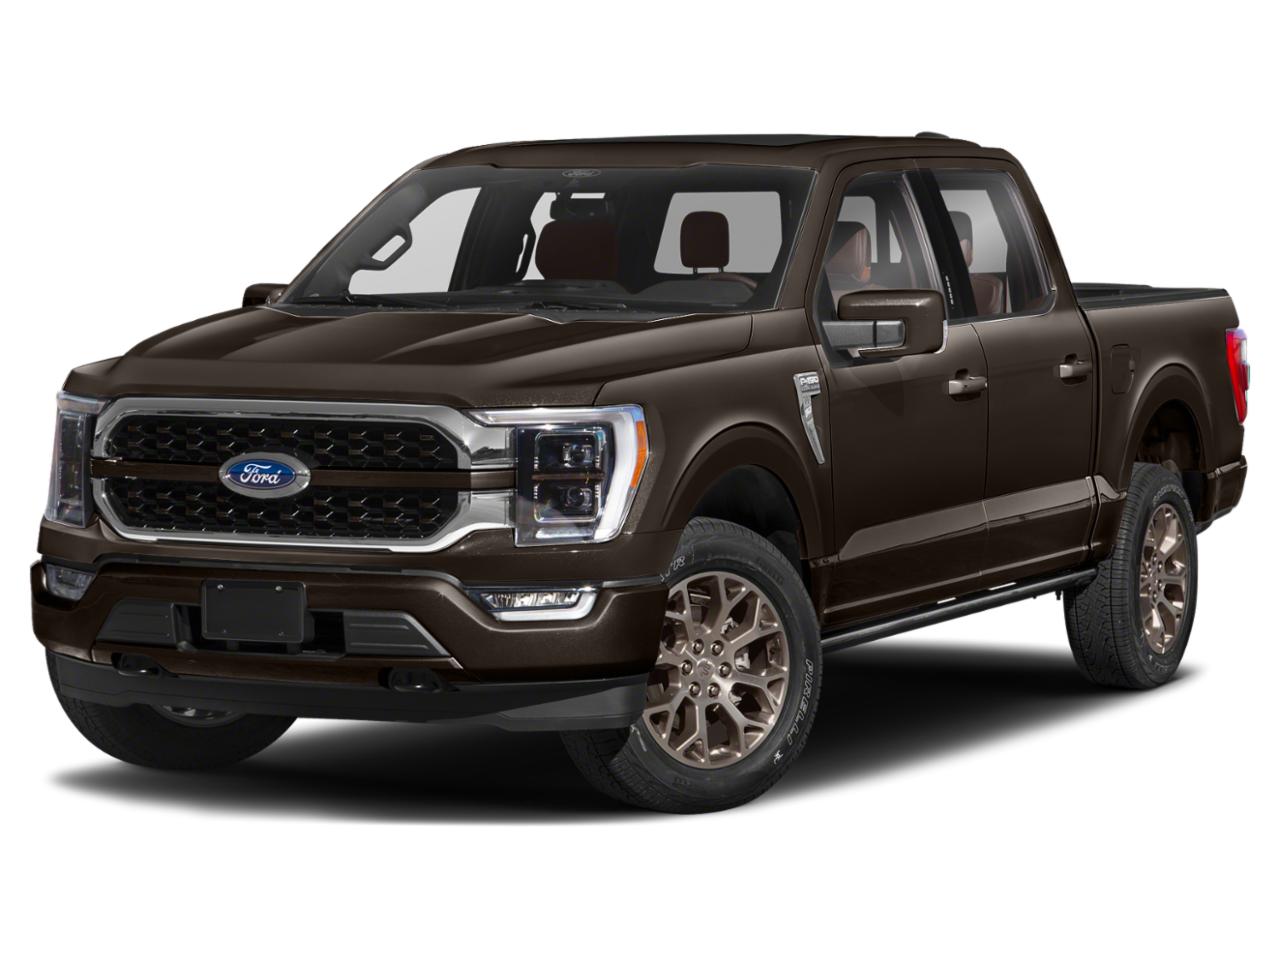 2021 Ford F-150 Vehicle Photo in Stephenville, TX 76401-3713